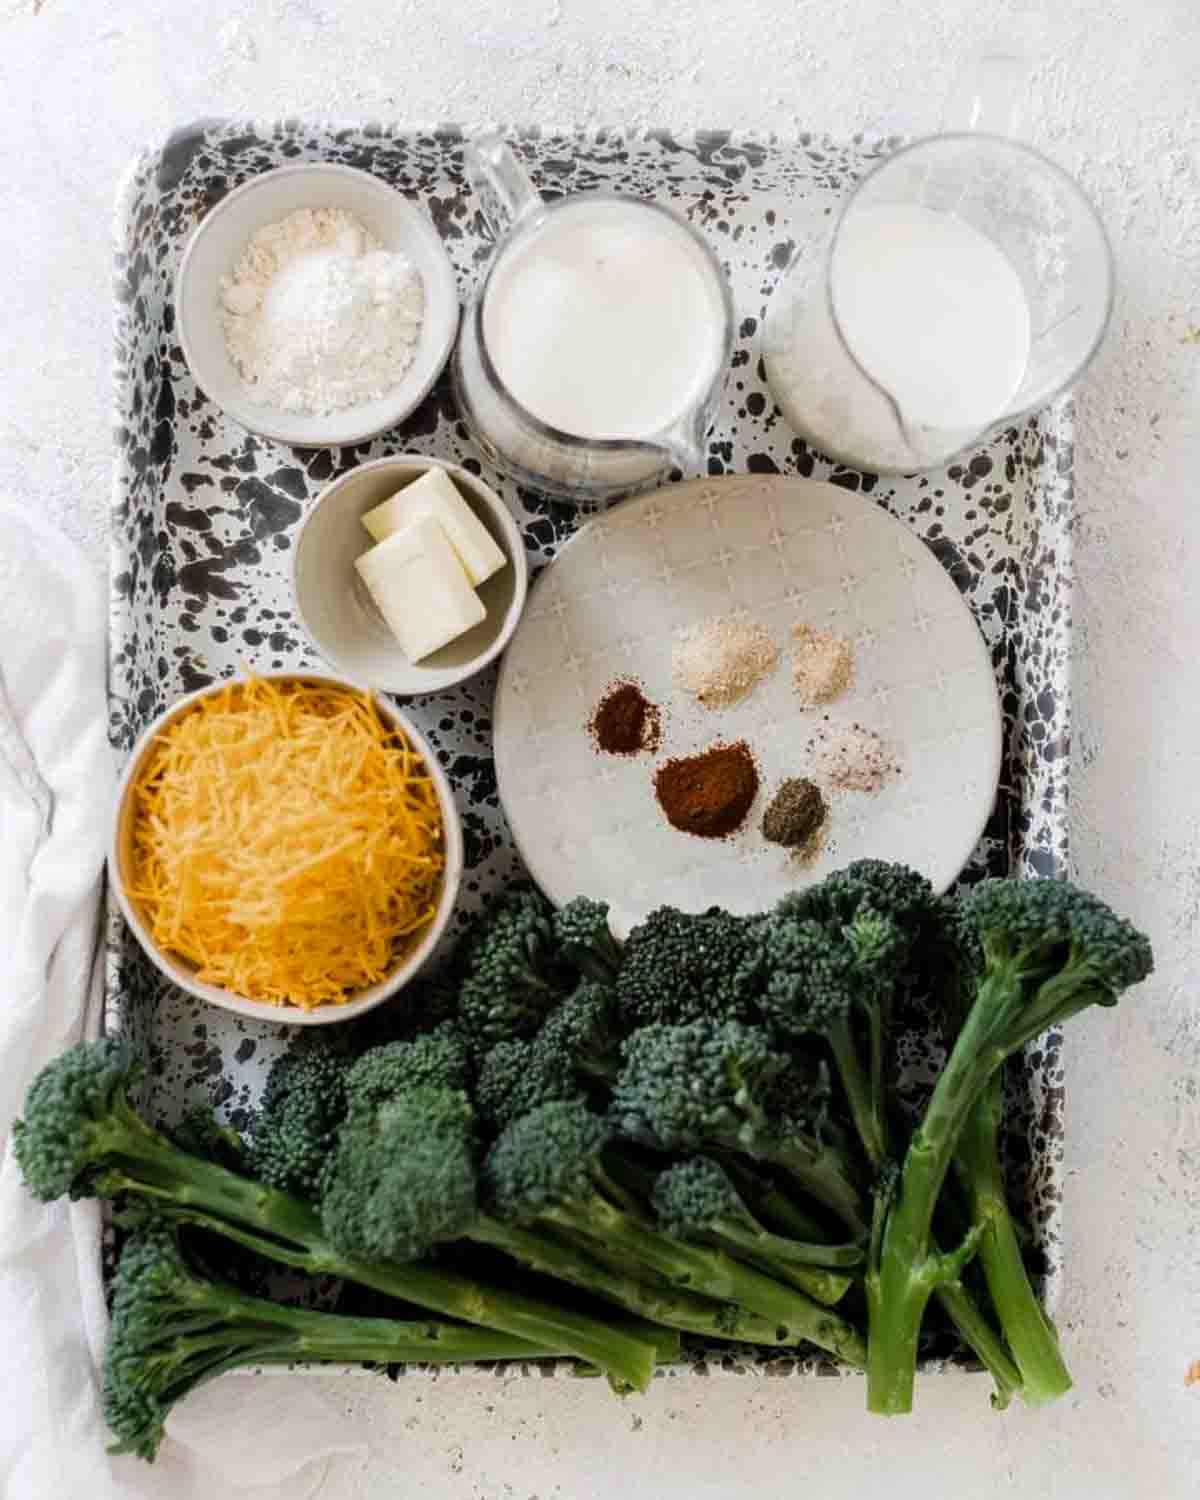 Ingredients needed to cook broccoli and cheese sauce on a marbled baking sheet.